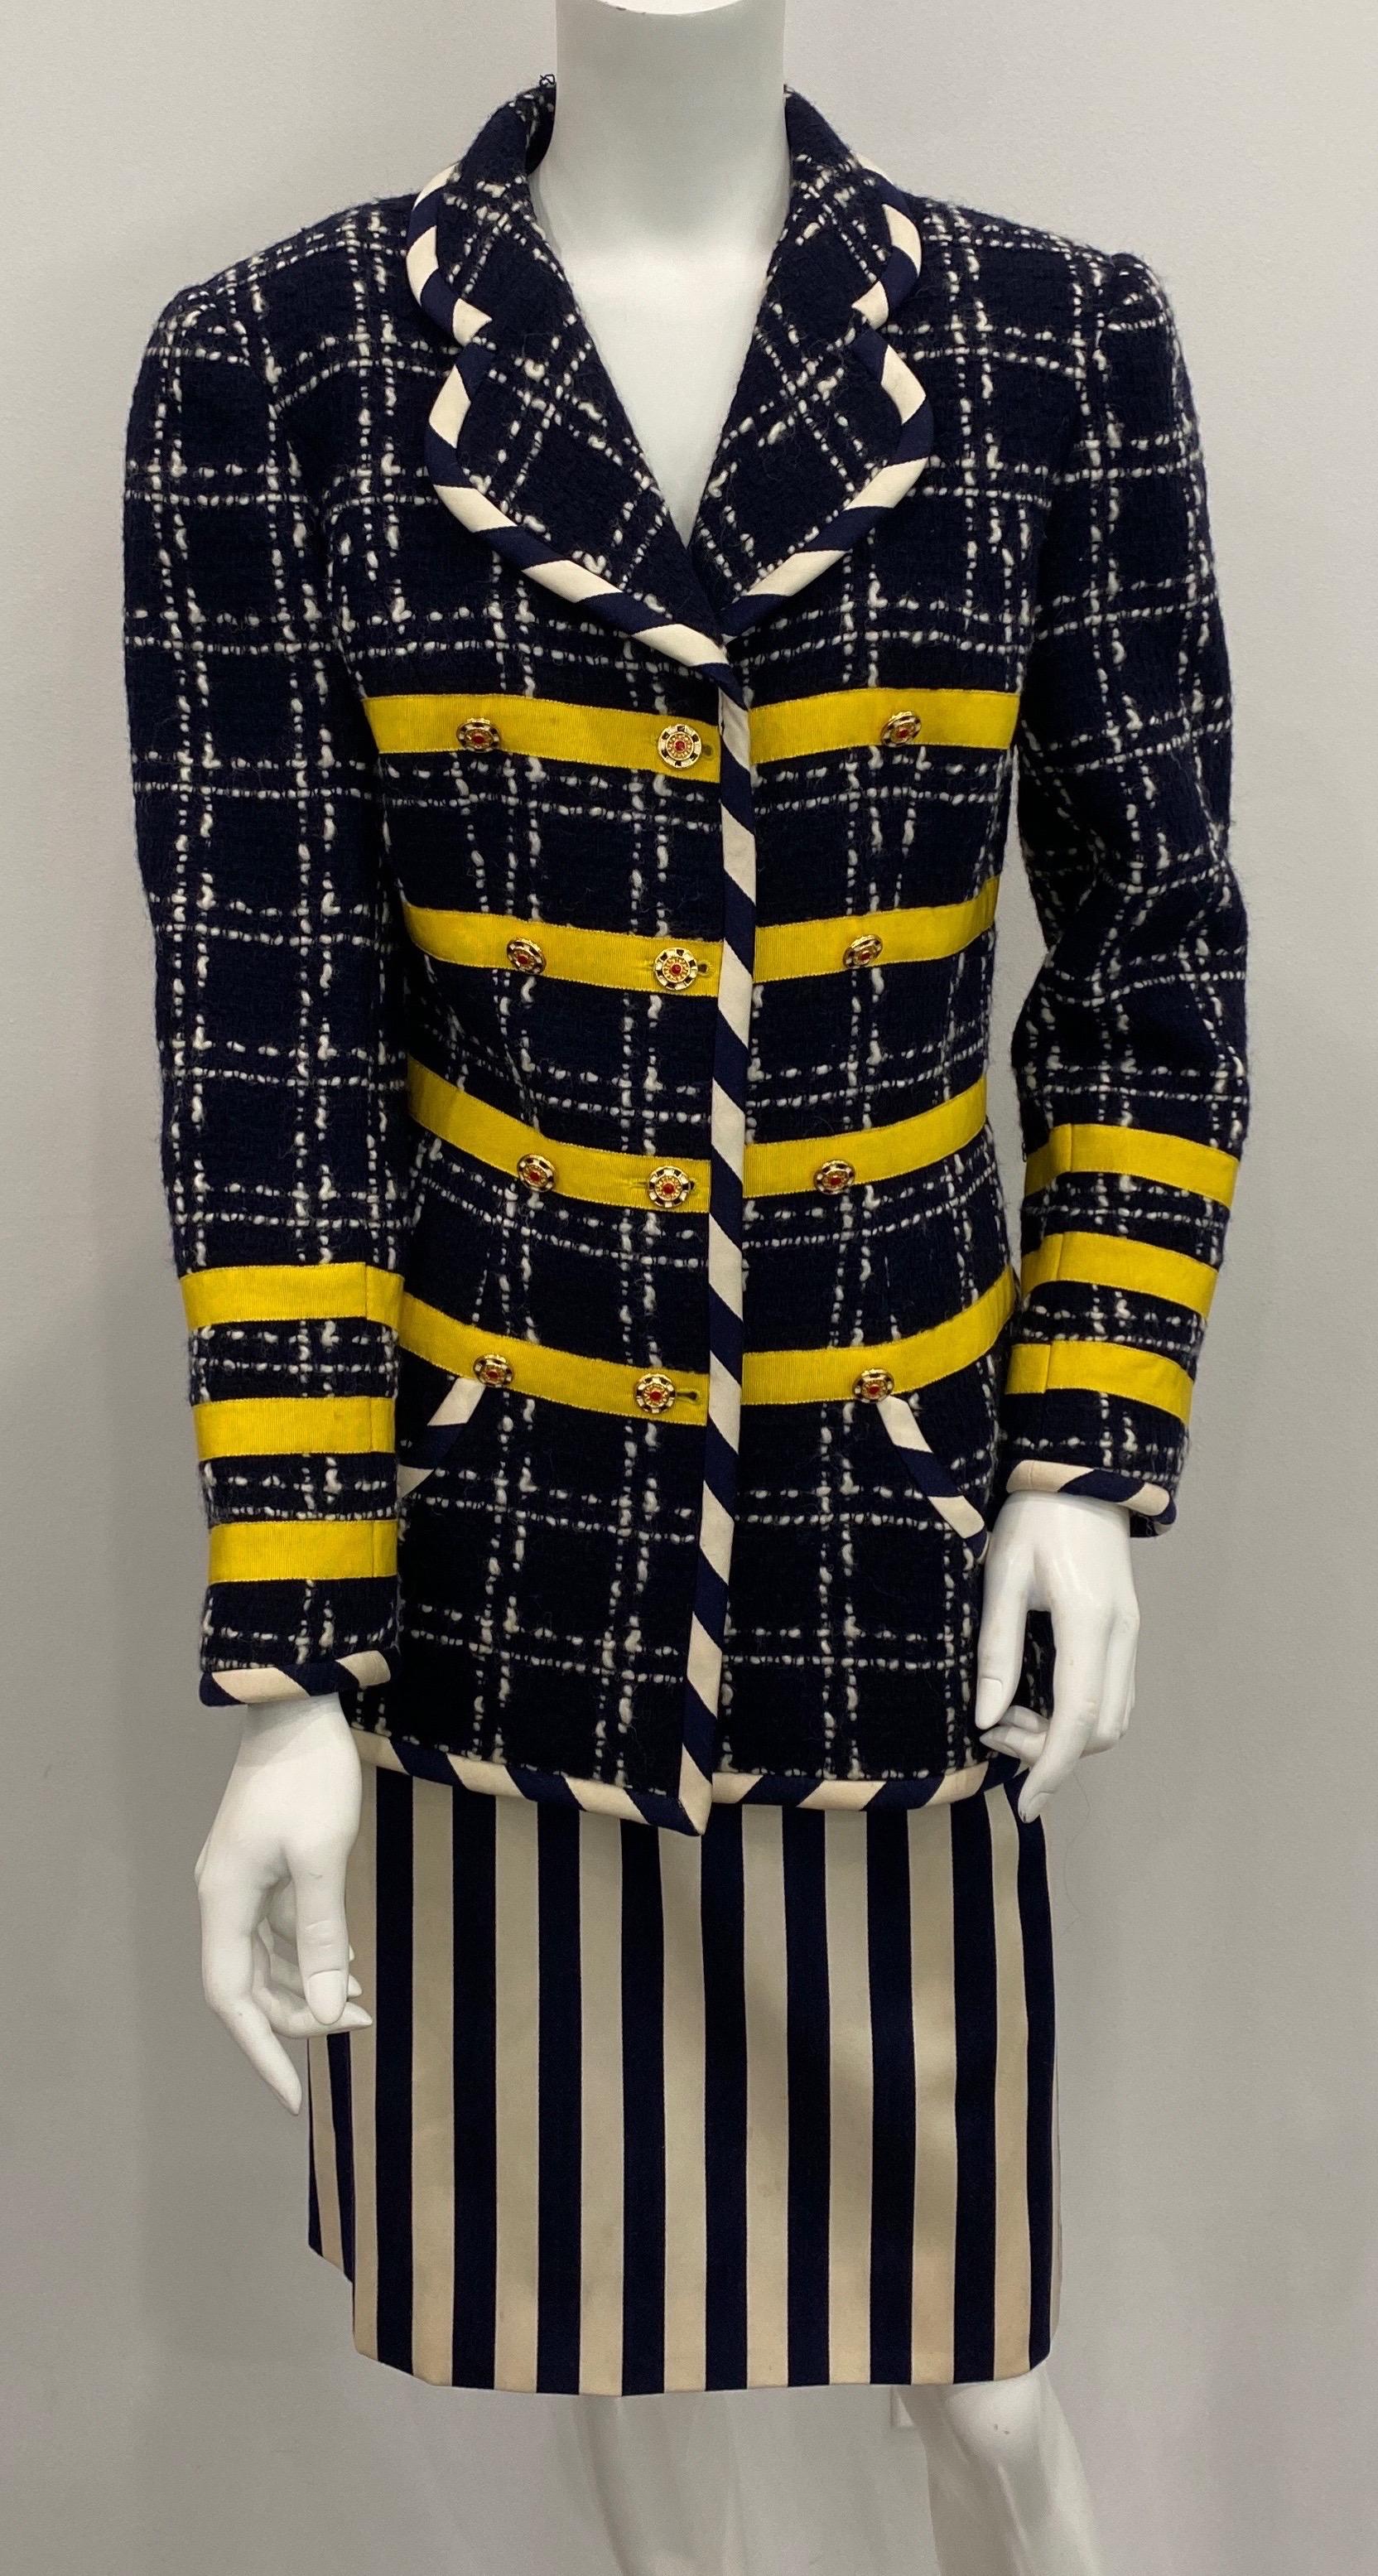 This vintage 1990’s Navy Boucle Jacket has white stitching throughout making a large checkered pattern. The jacket also has 3 yellow grosgrain ribbon making horizontal rows along the front and sleeve. The fully lined jacket is trimmed in a navy and